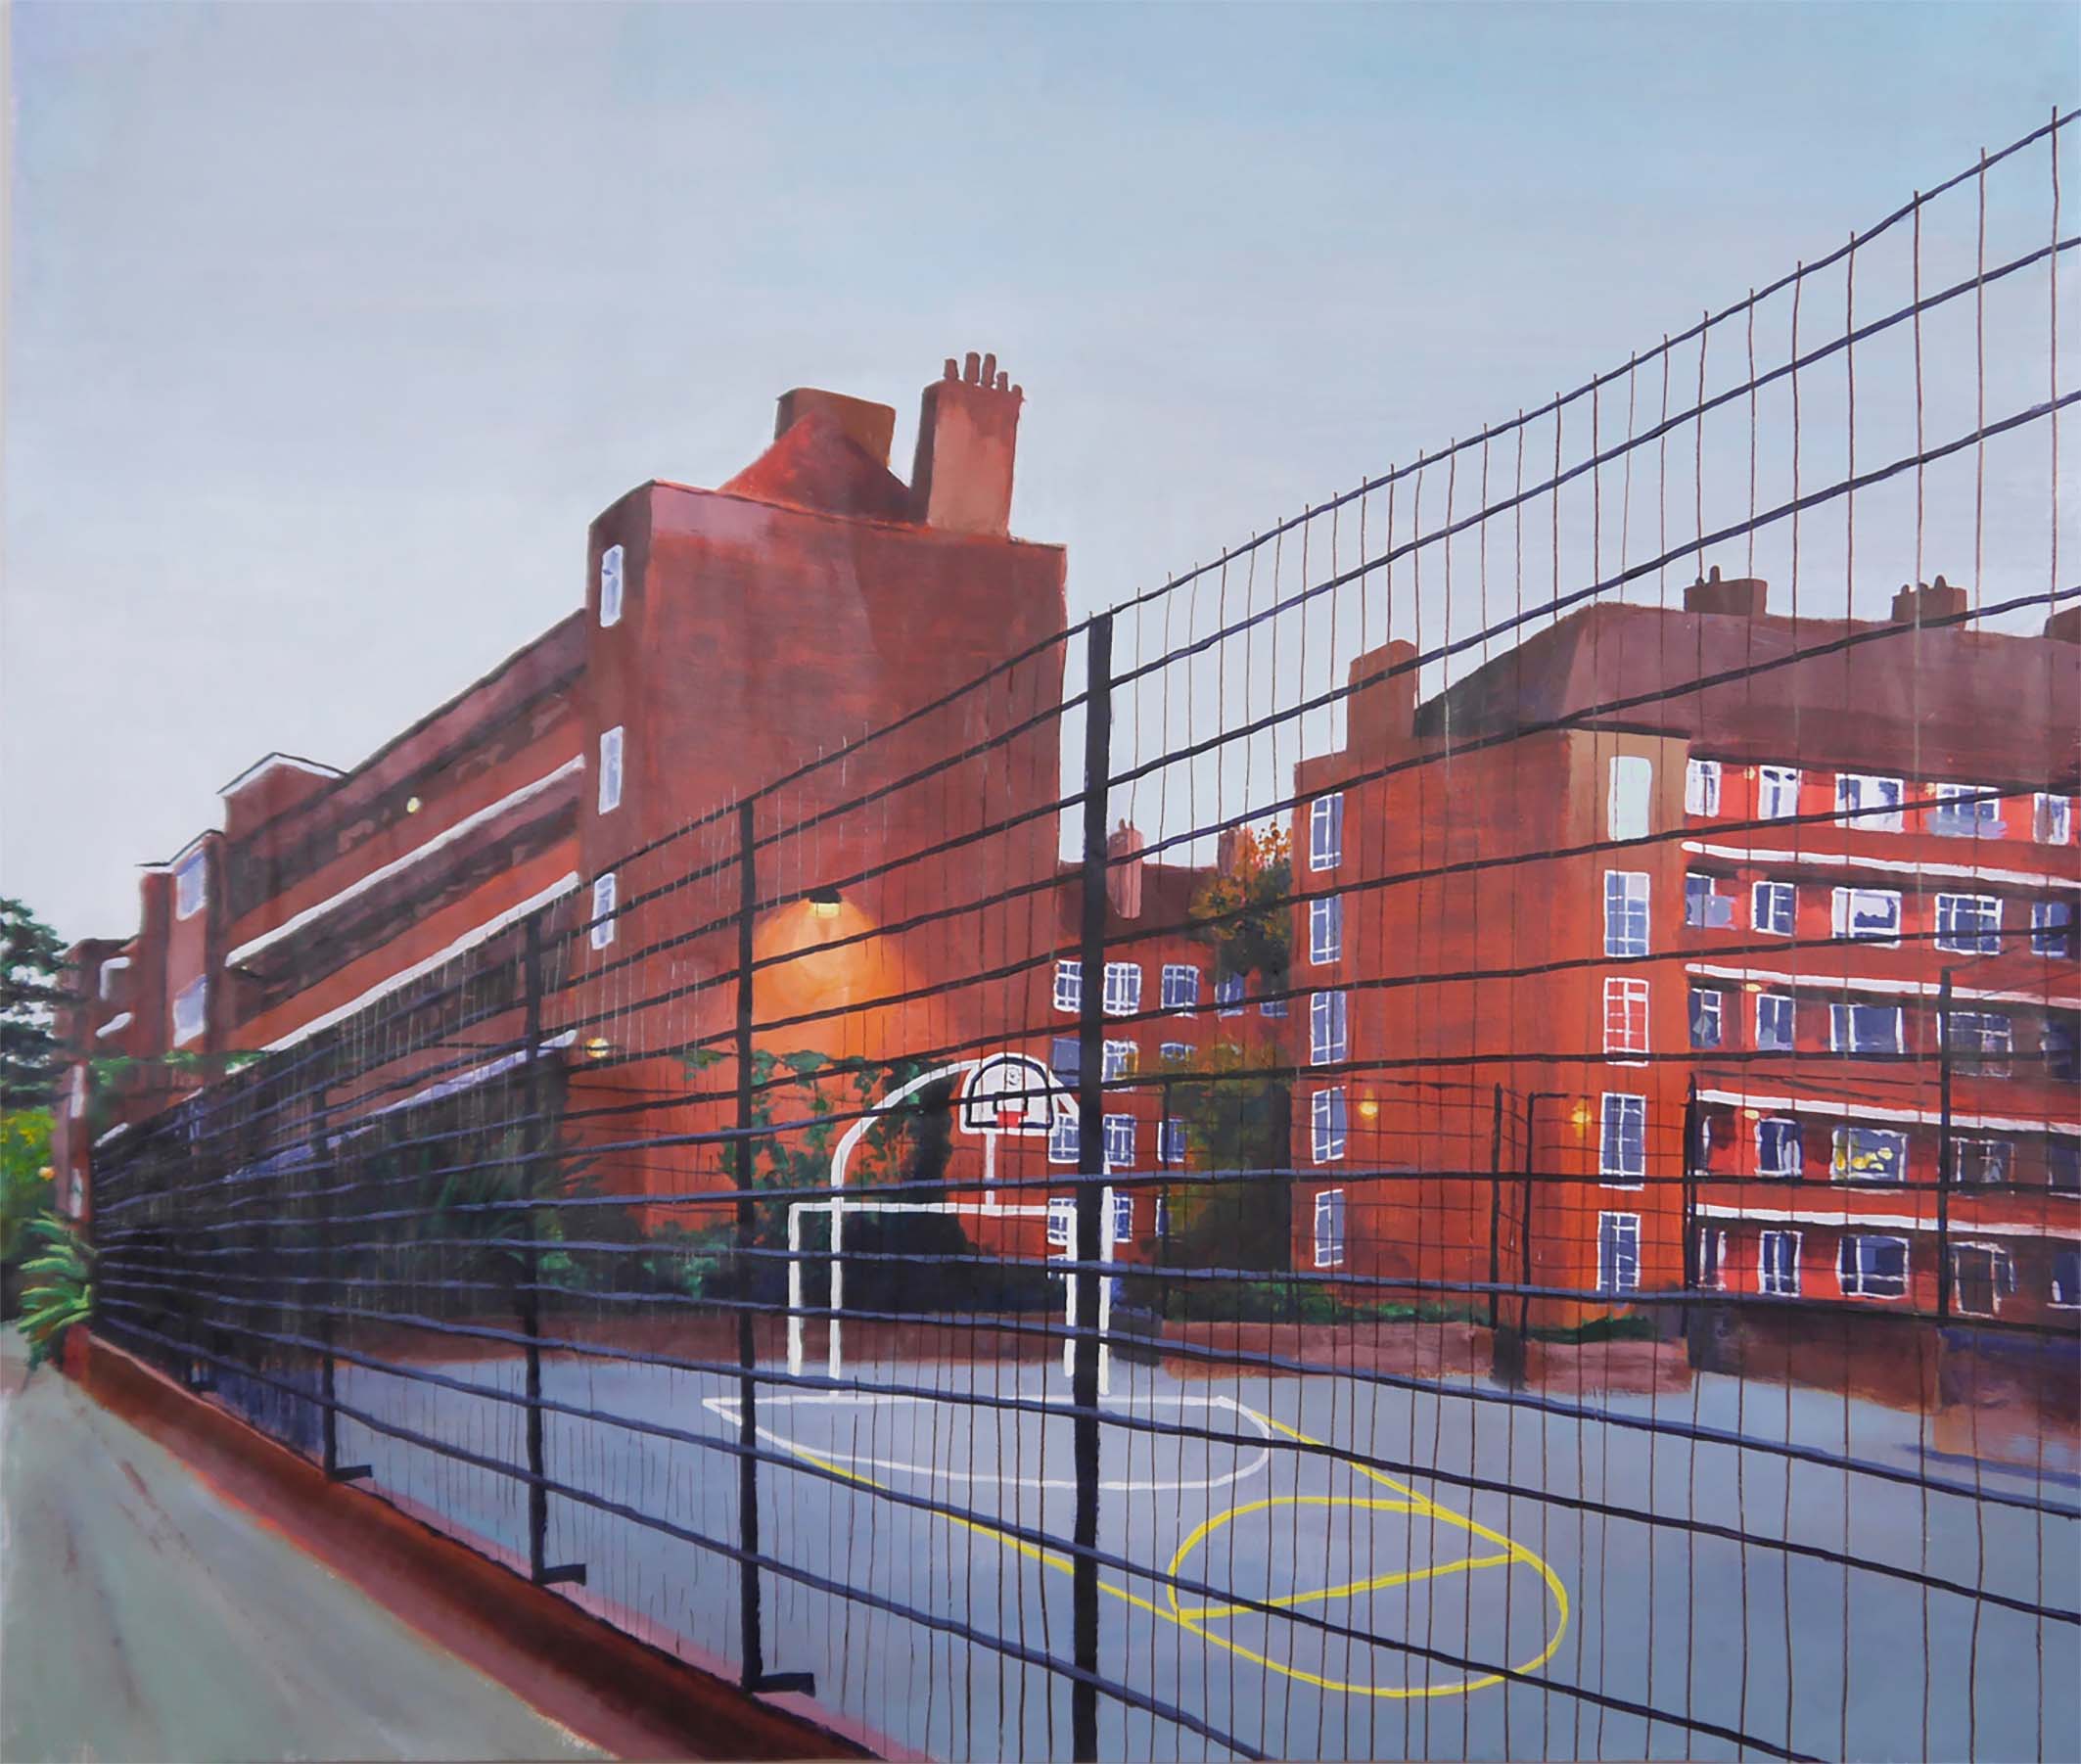    BROOKE ROAD  135 x 115 cm (2016)  acrylic on 200 gsm paper  sold   